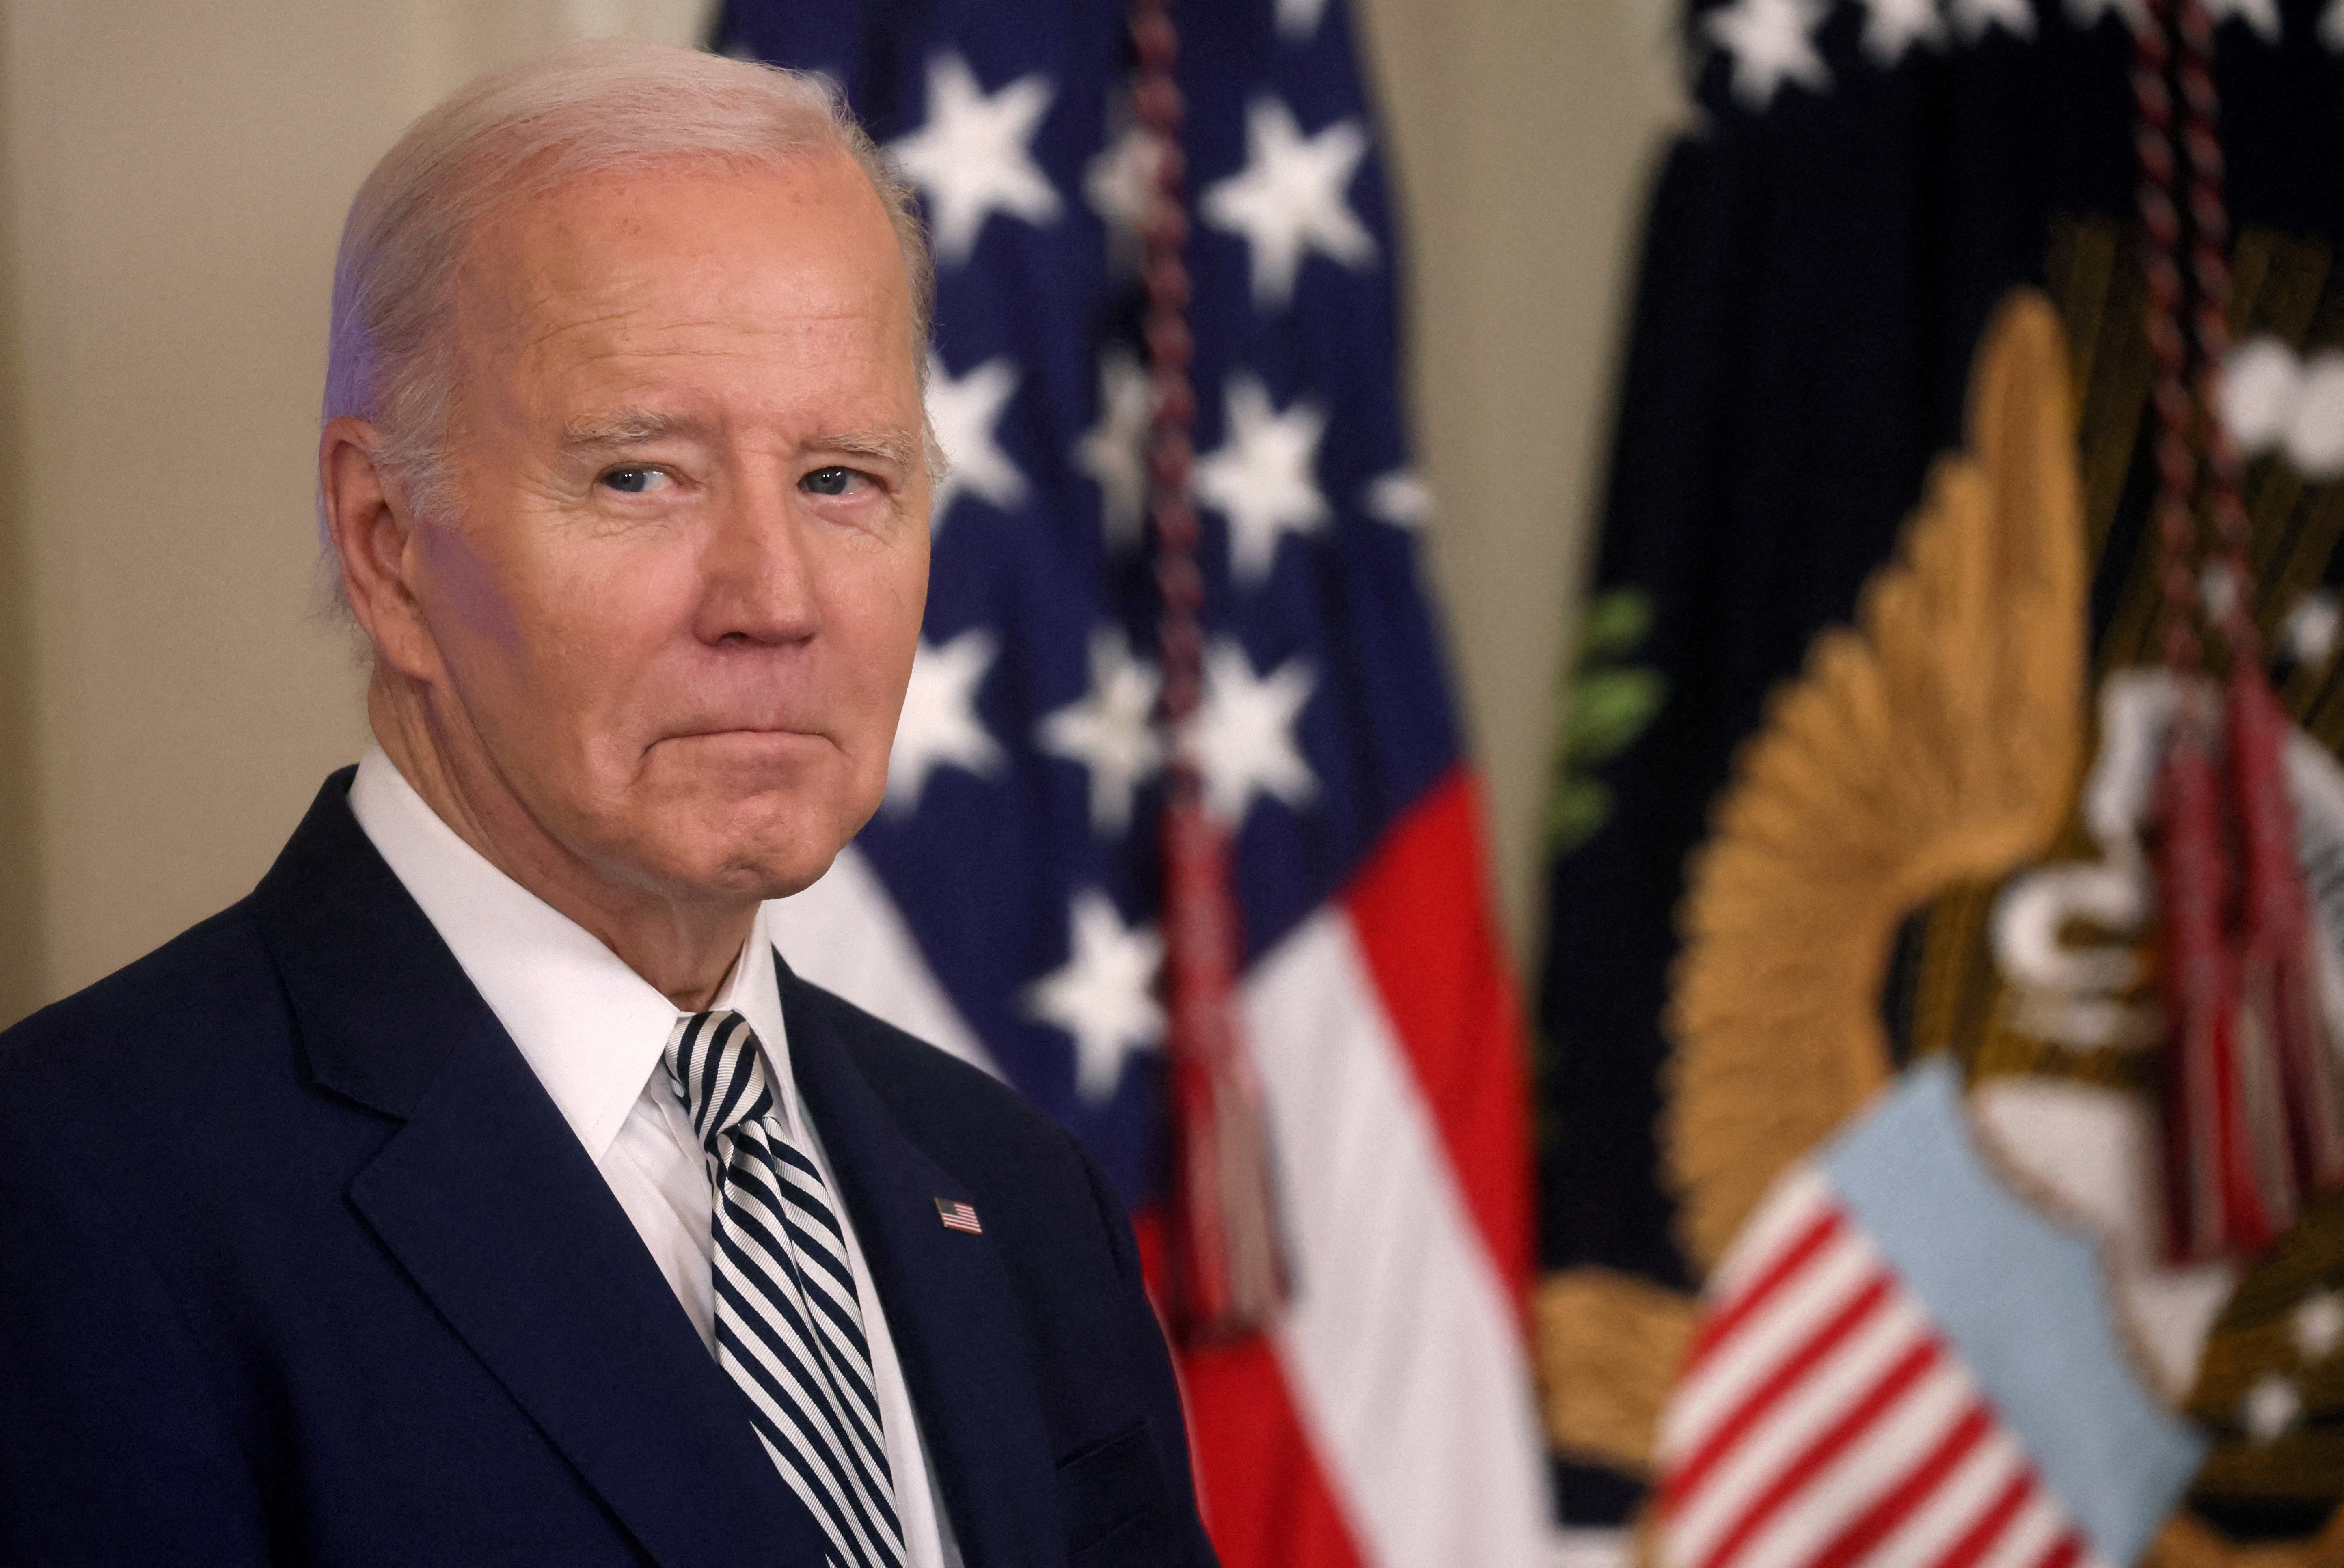 US President Joe Biden holds an event to sign an executive order regarding artificial intelligence at the White House in Washington